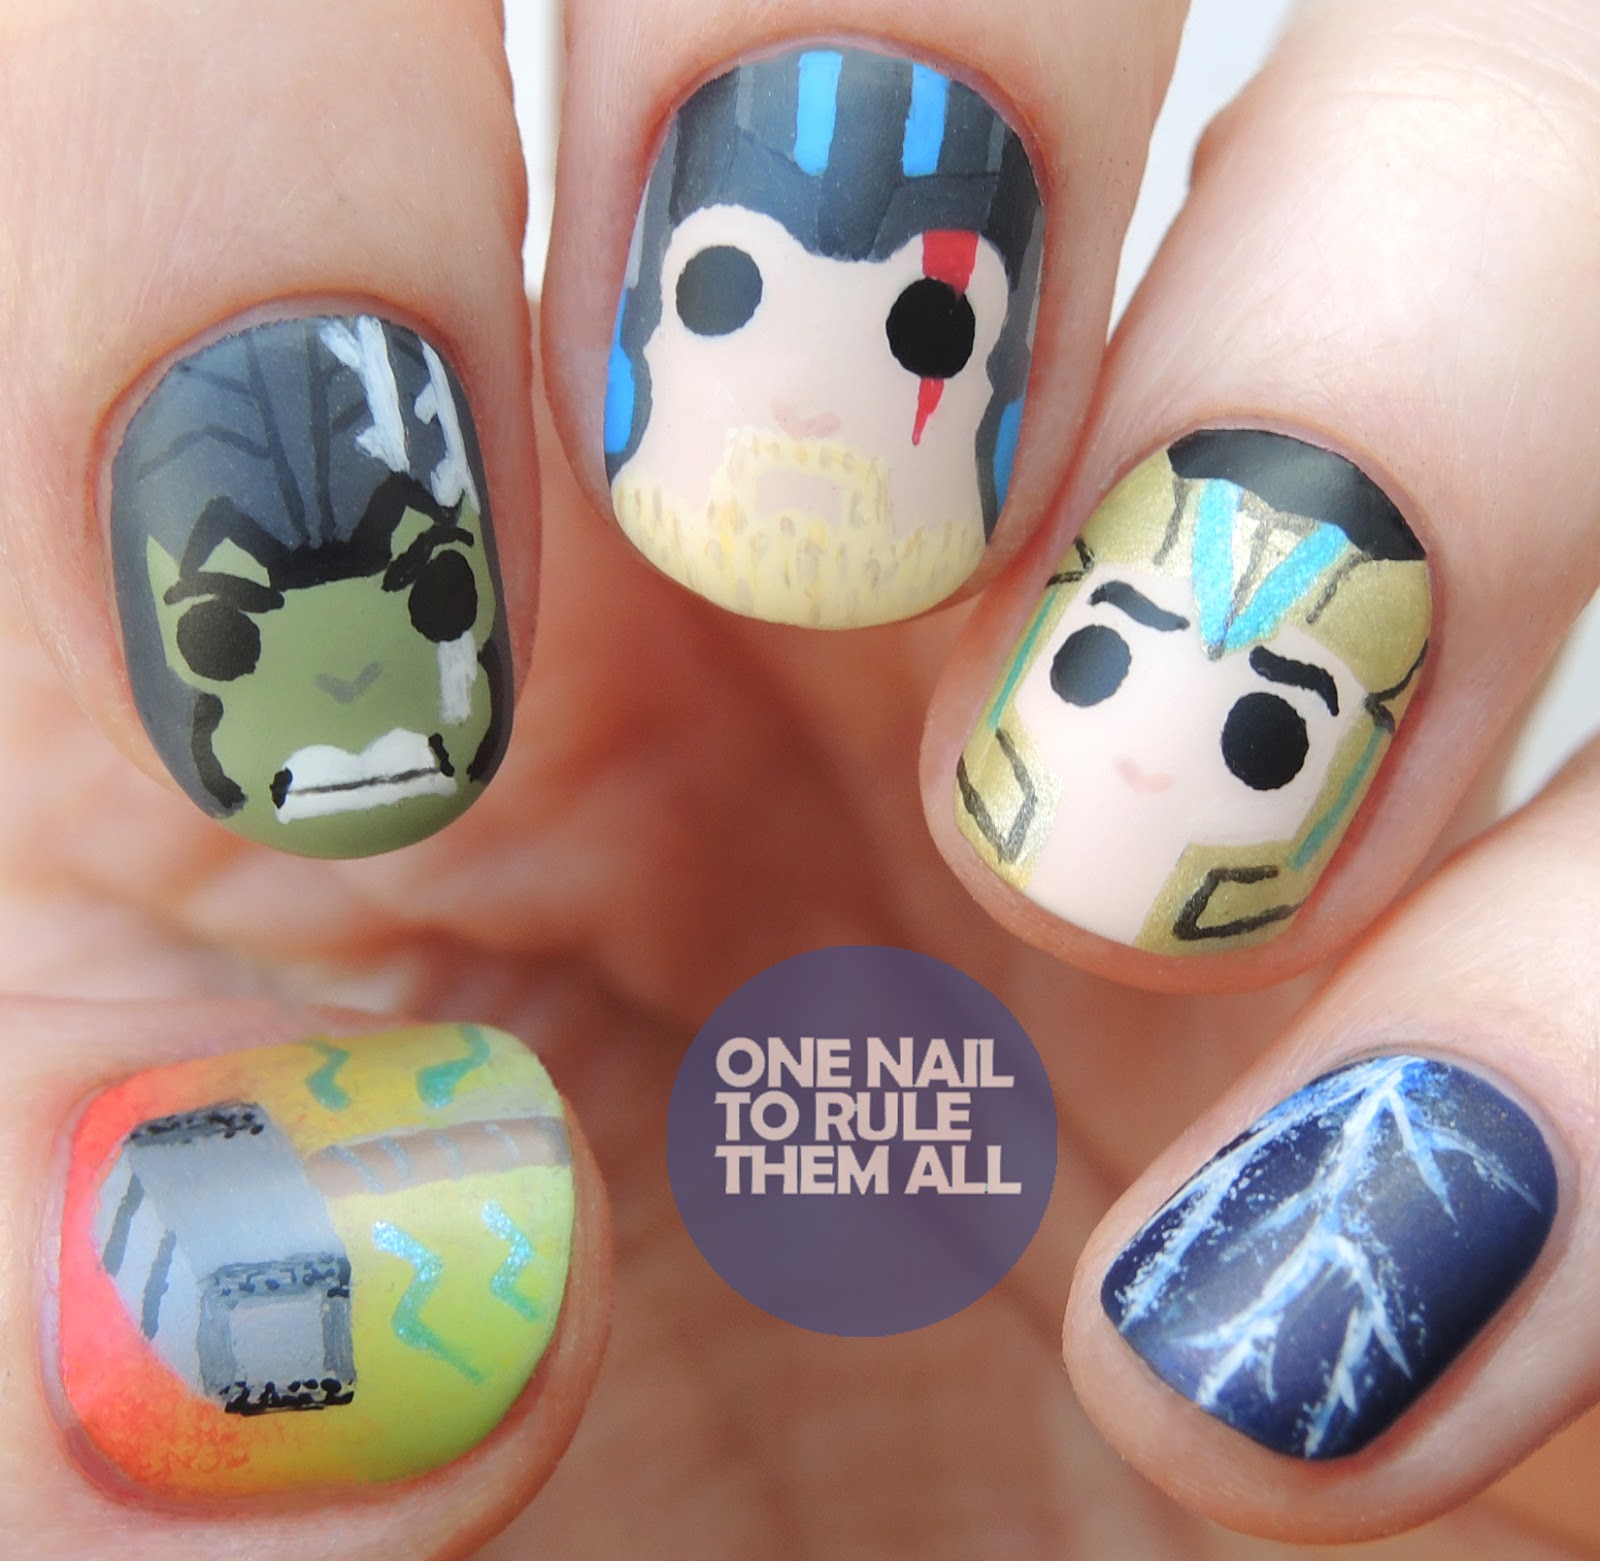 Lacquered Lawyer | Nail Art Blog: Avengers